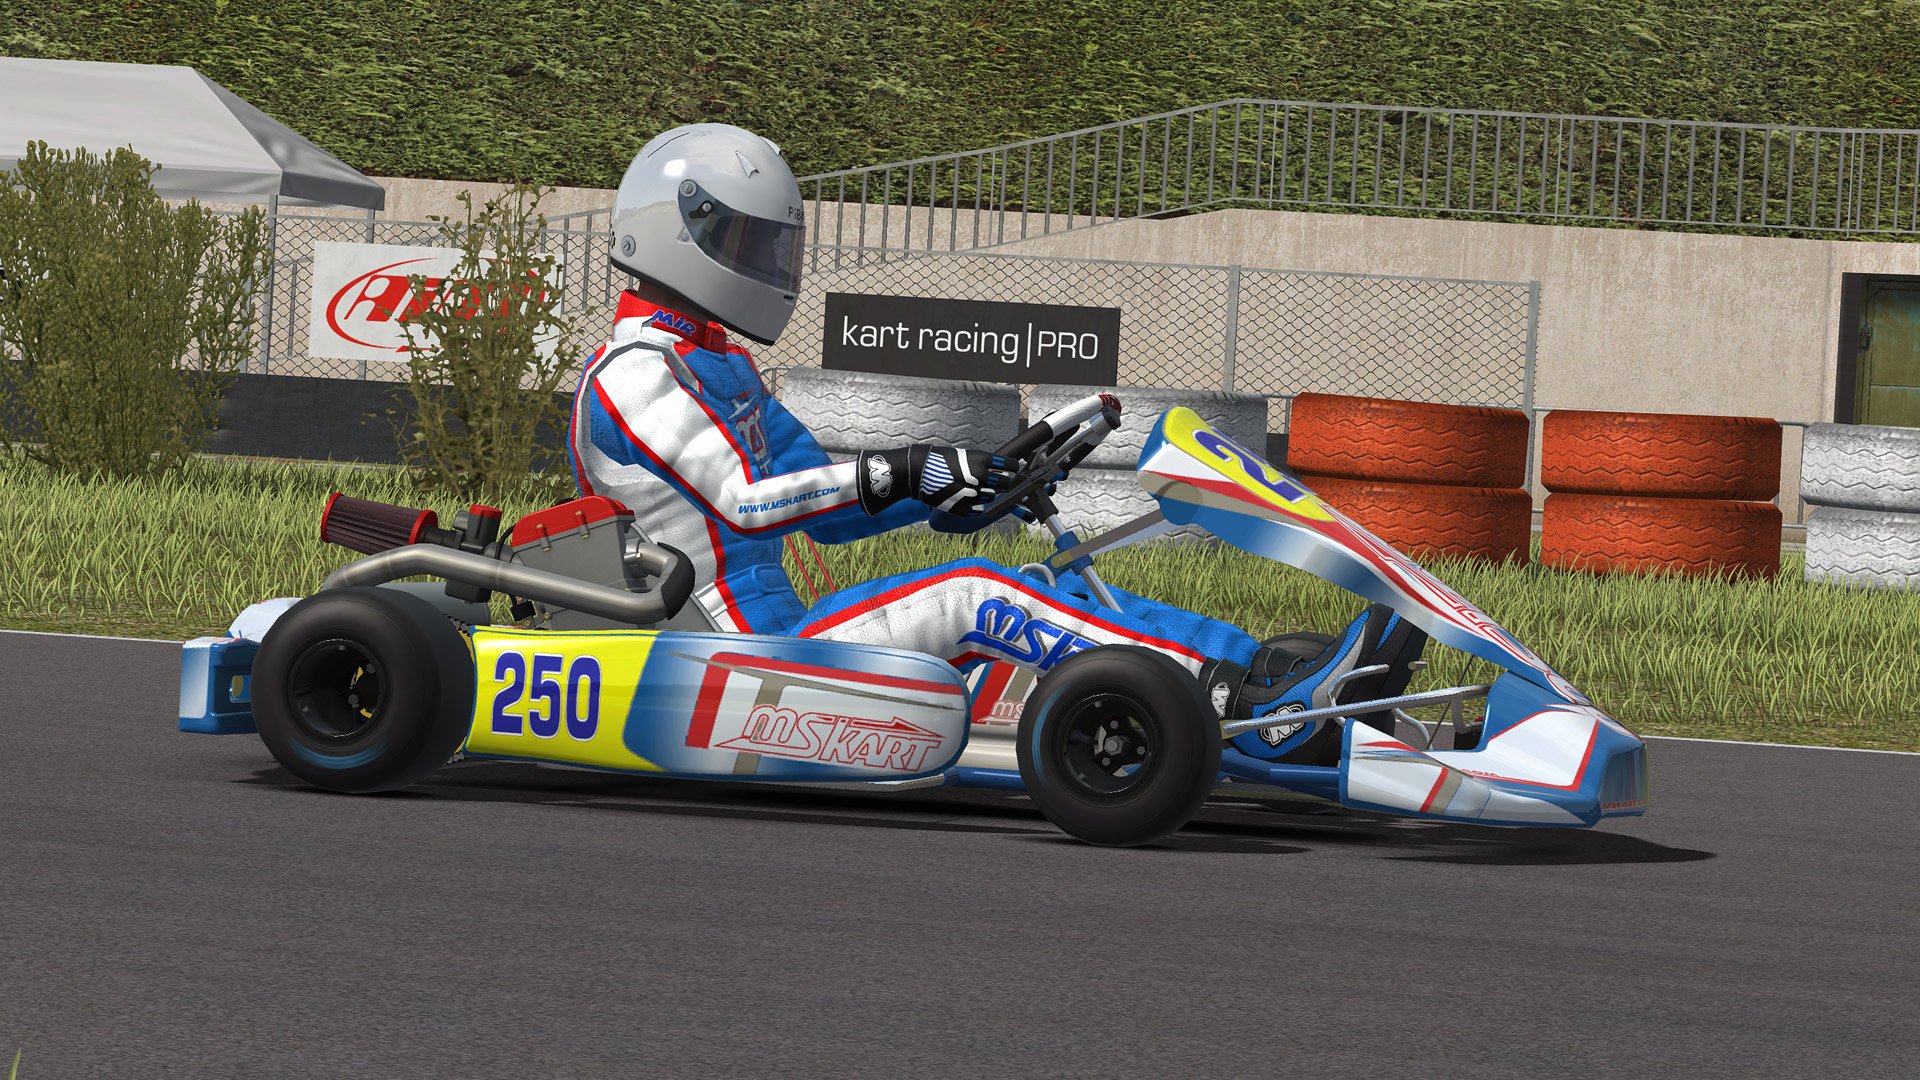 More information about "Kart Racing Pro: release 8 disponibile, arriva l'elettrico !"